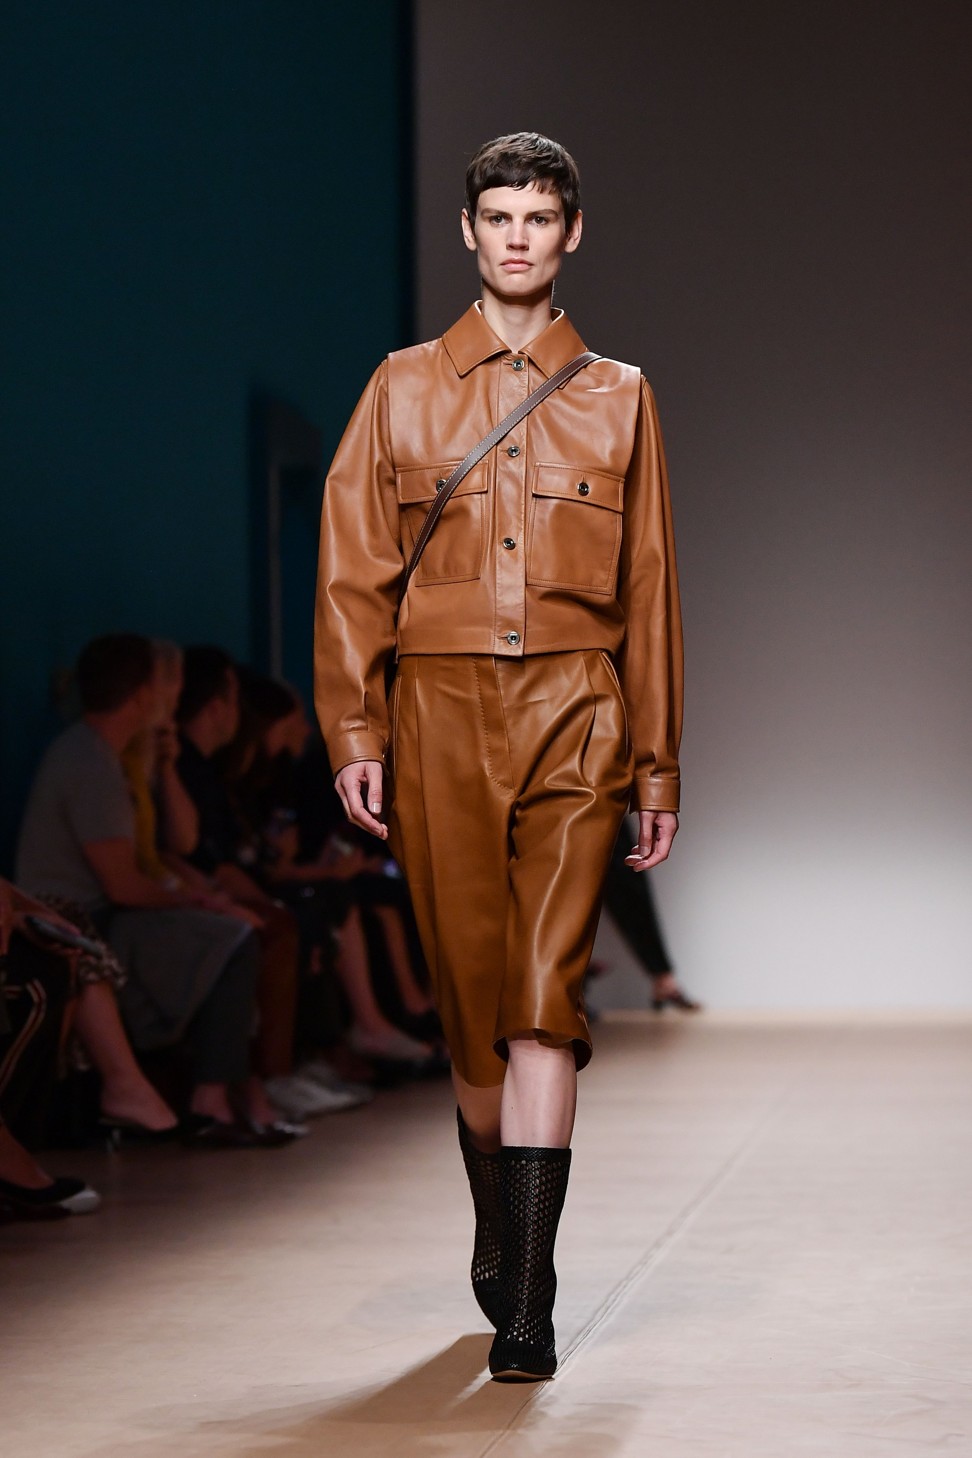 Leather featured prominently in the Salvatore Ferragamo show in Milan. Photo: AFP